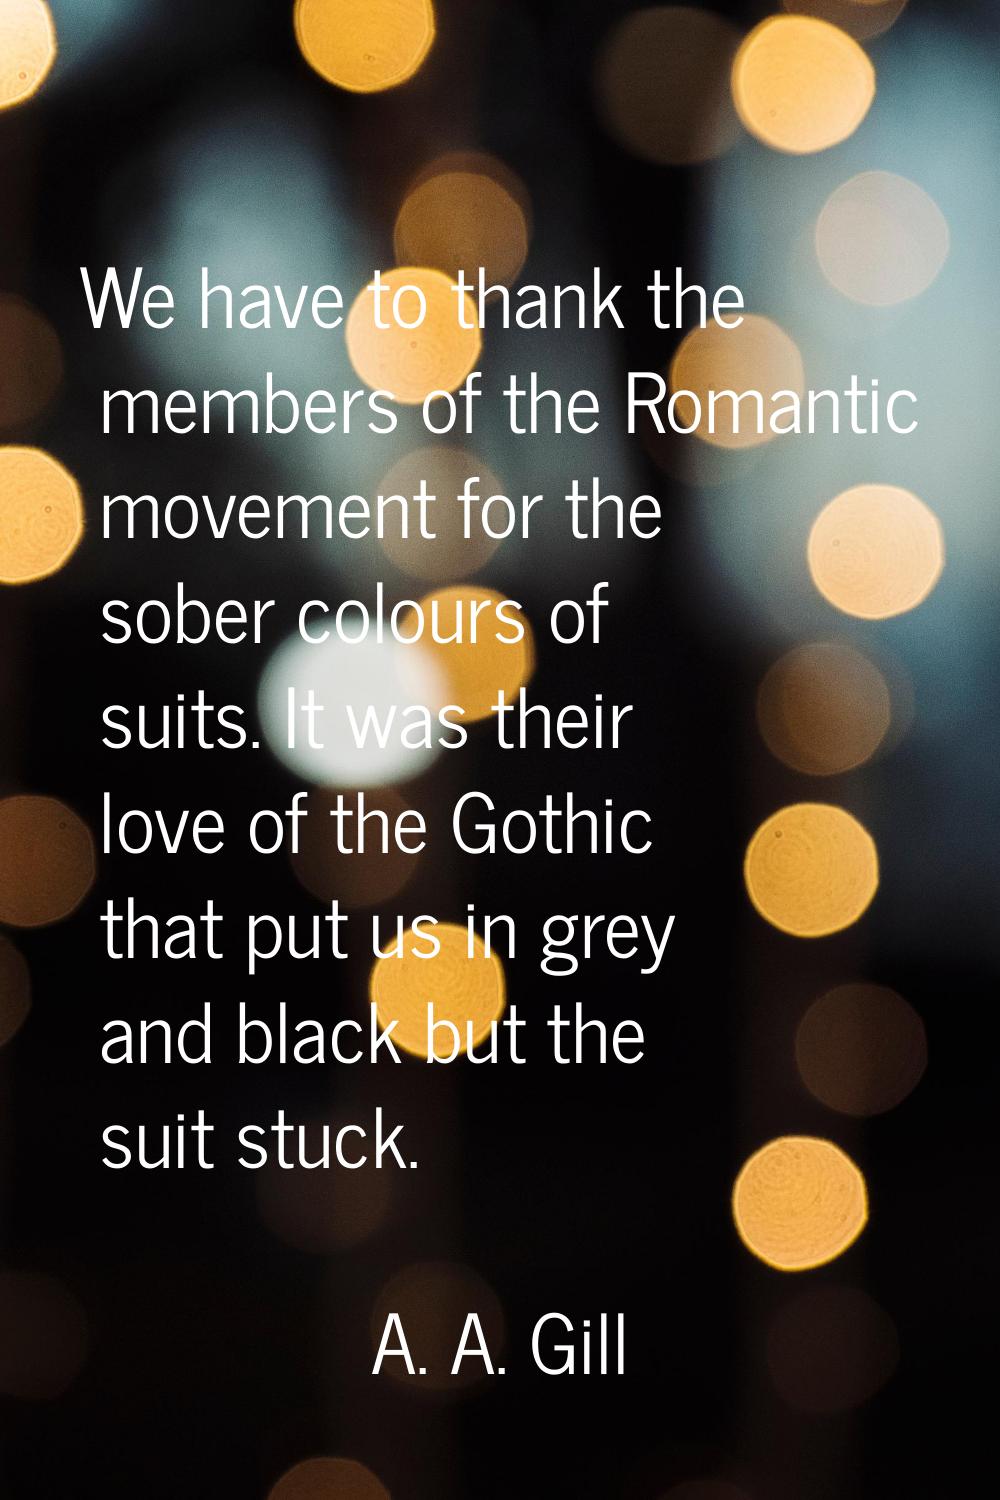 We have to thank the members of the Romantic movement for the sober colours of suits. It was their 